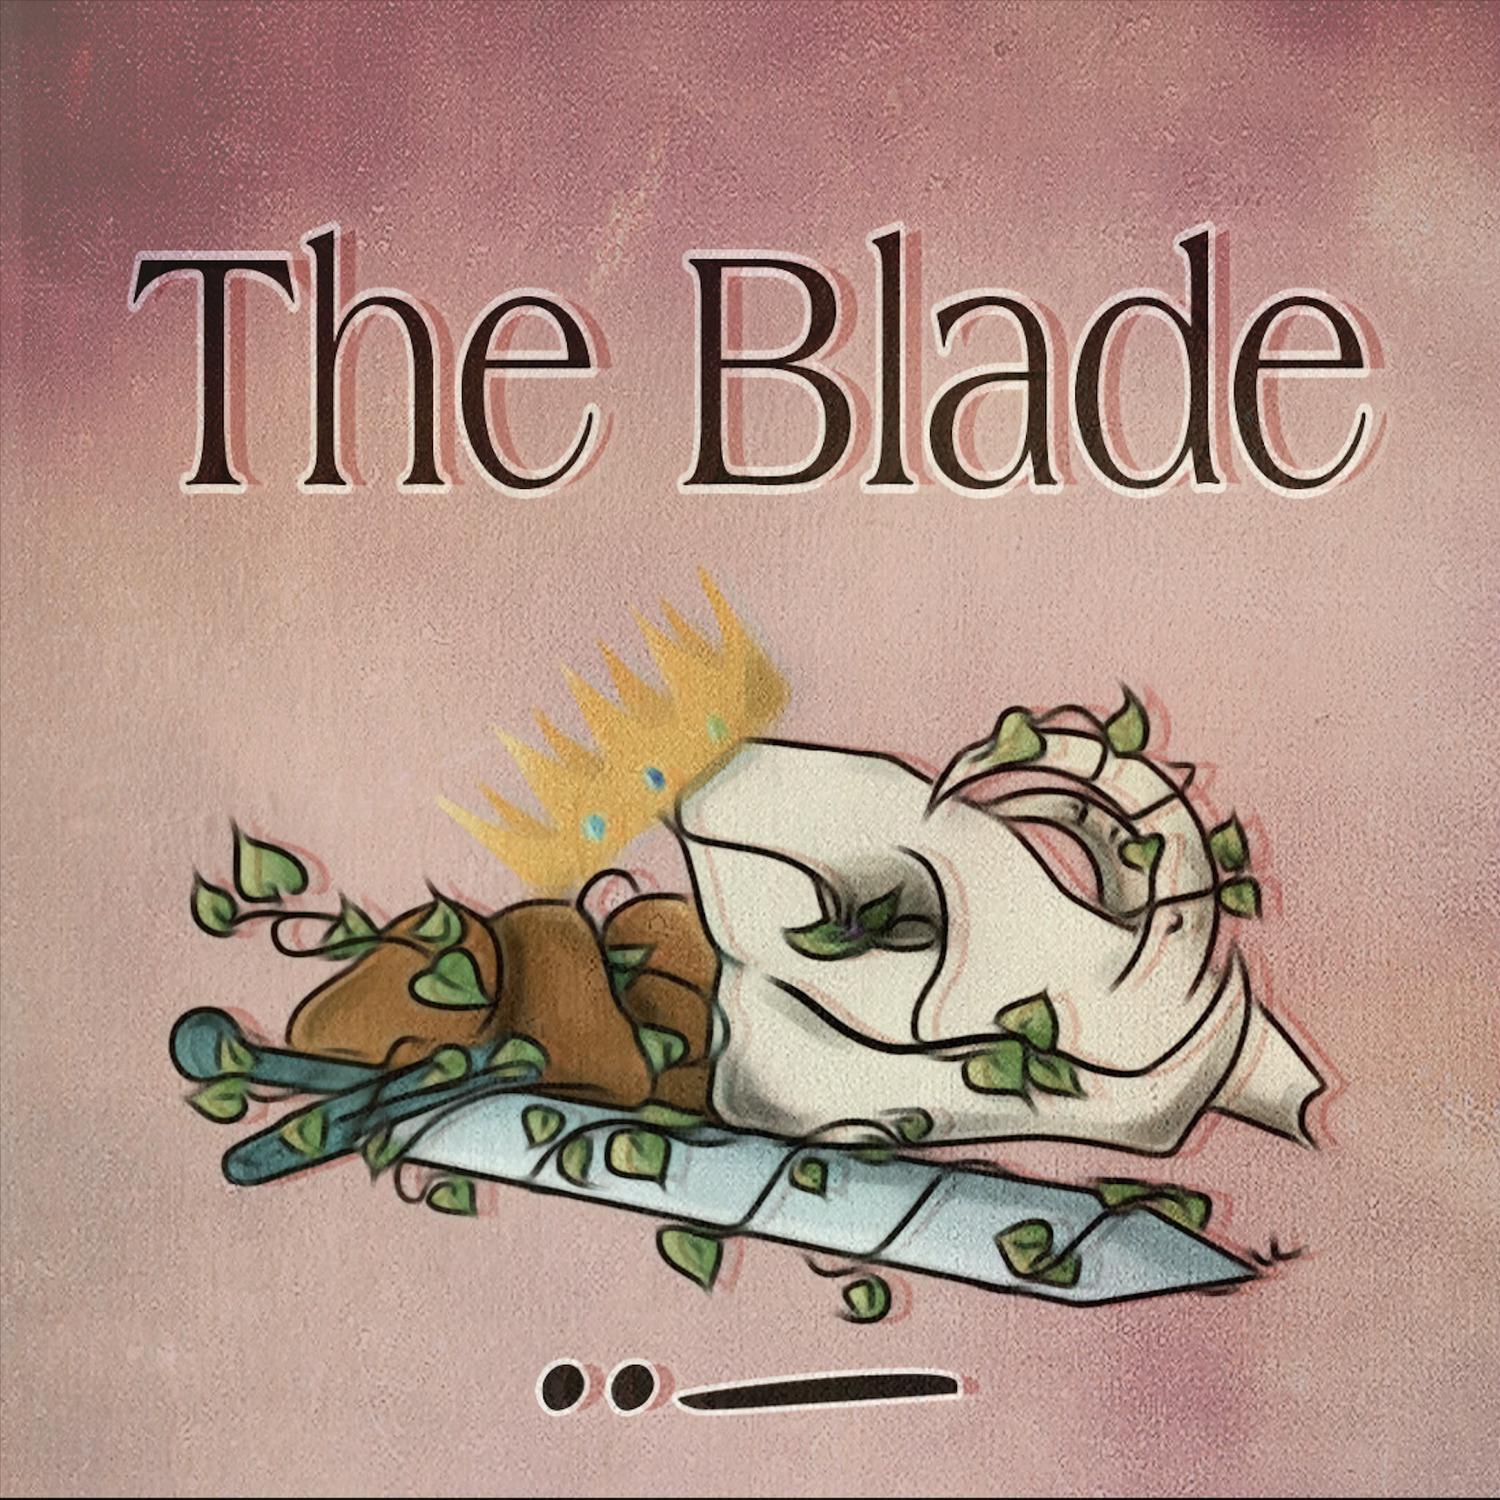 The Blade歌词 歌手Unknown-专辑The Blade-单曲《The Blade》LRC歌词下载